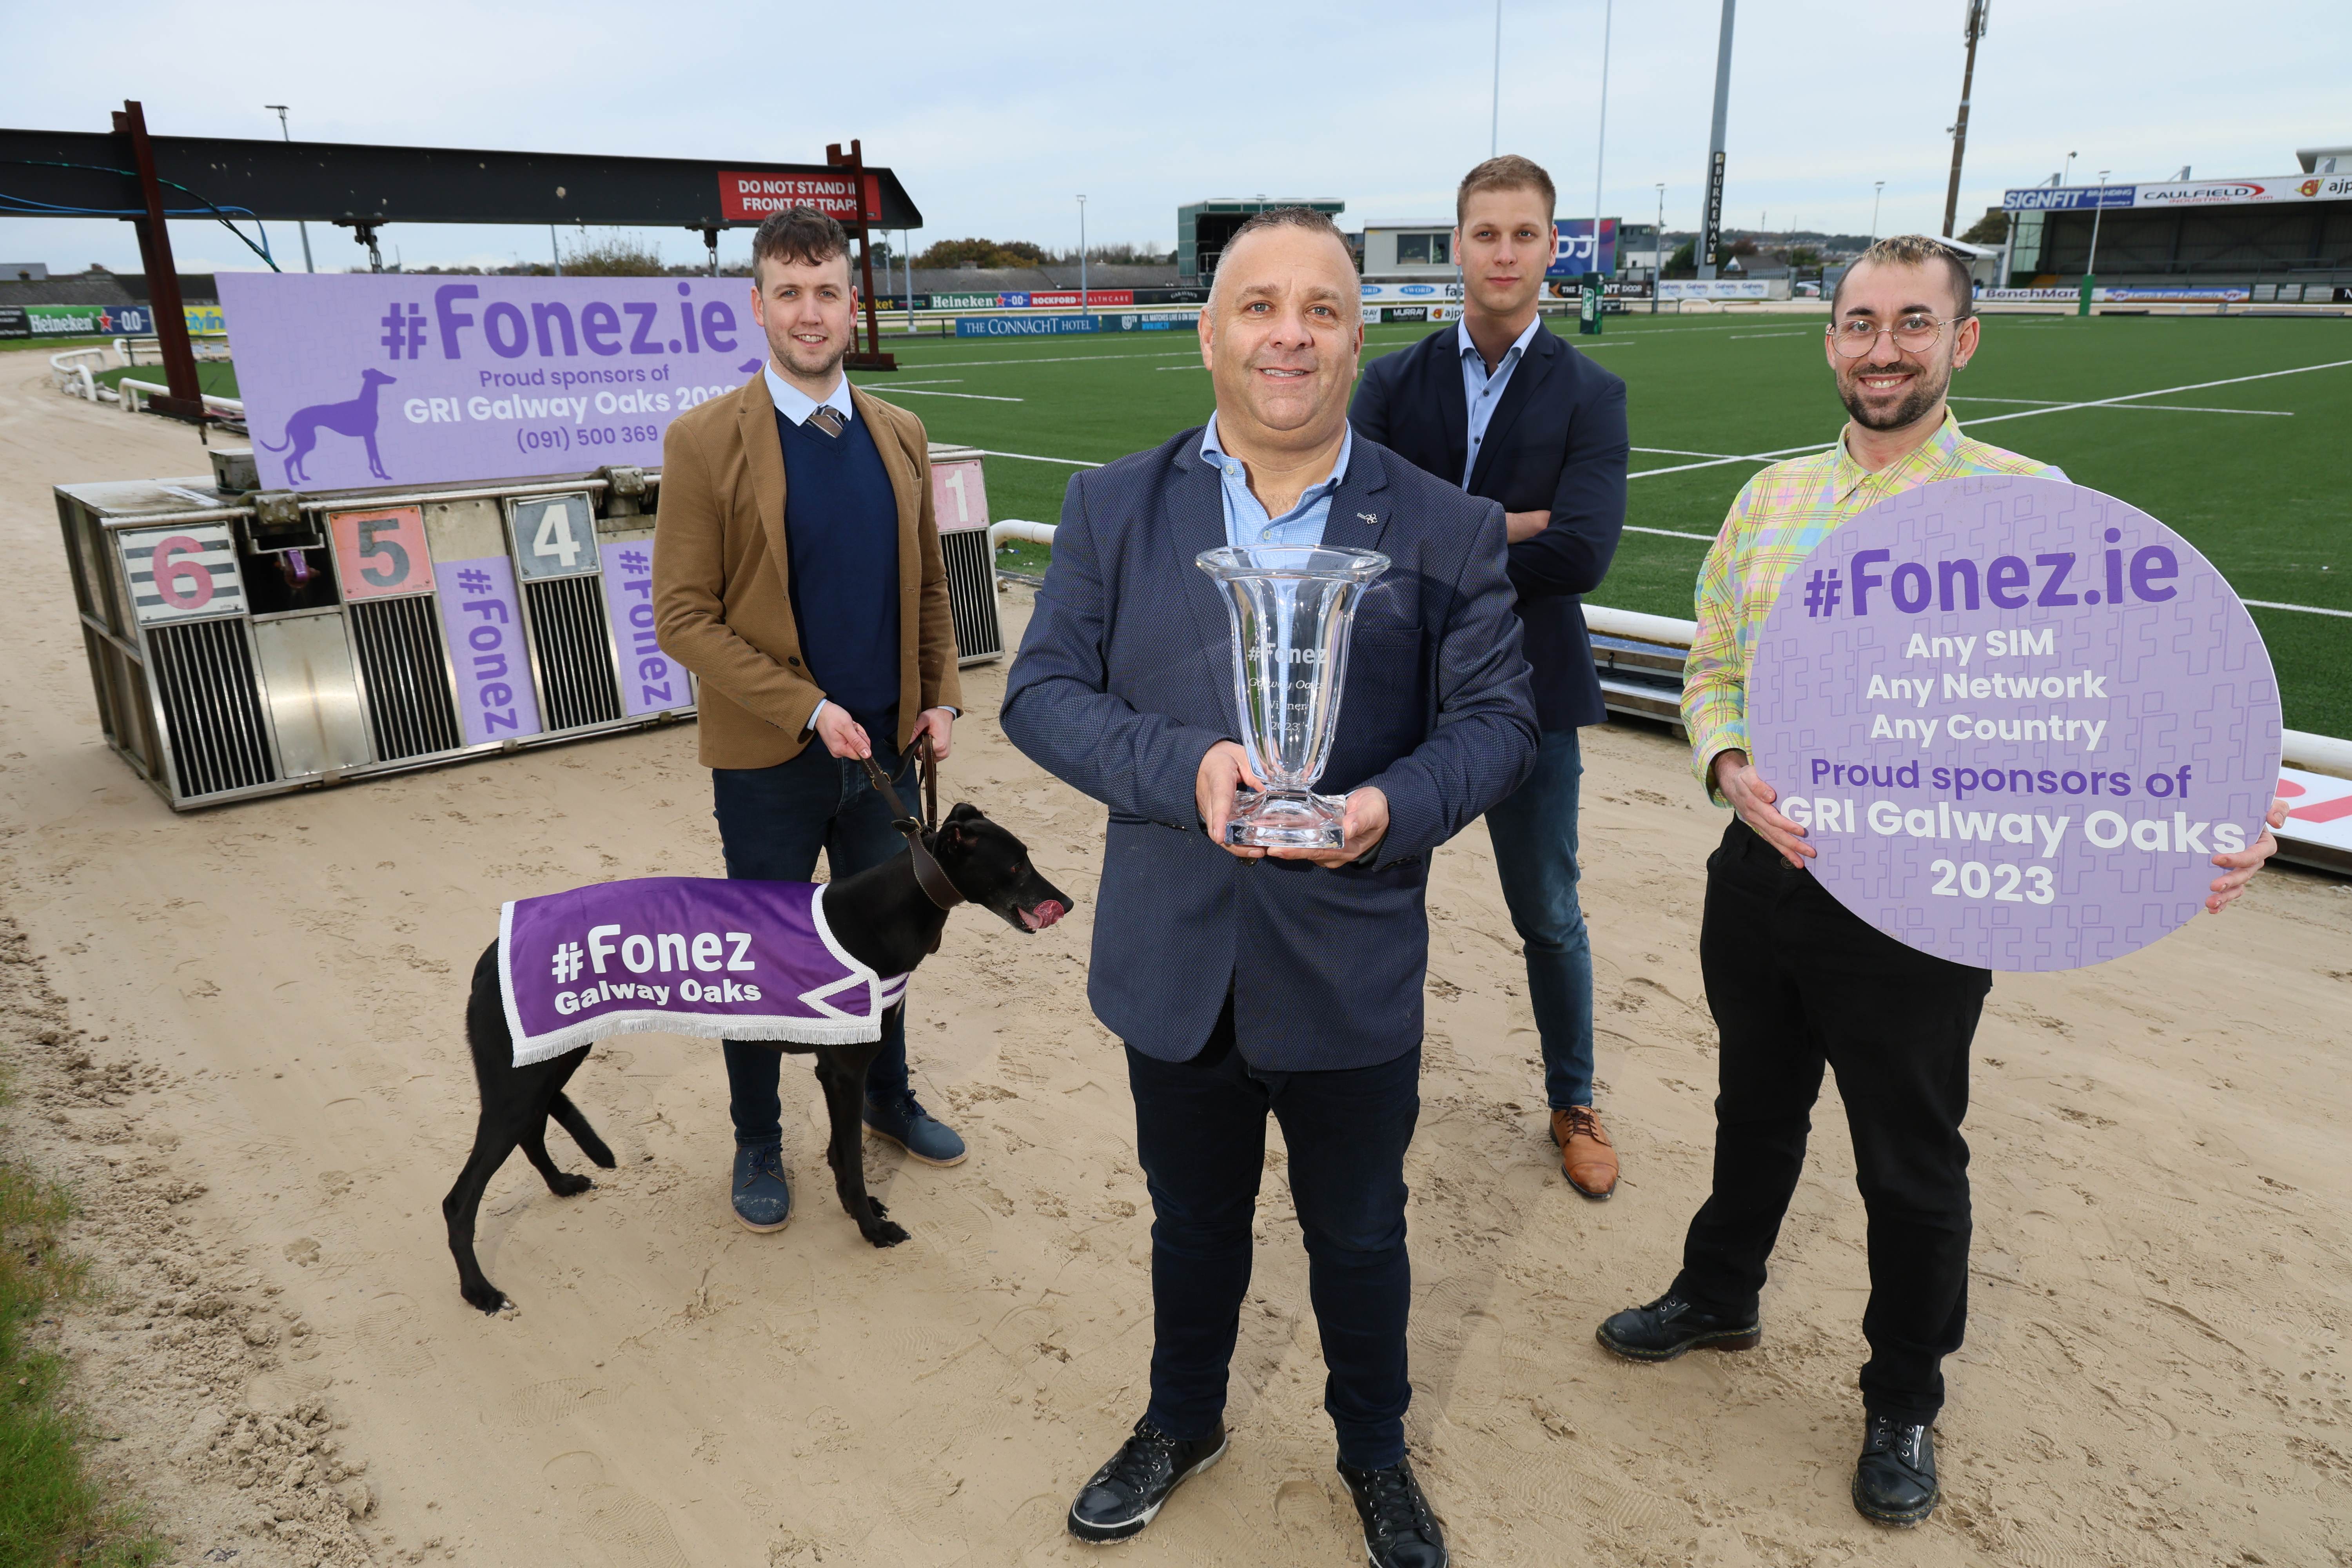 Picture shows four people launching the Fonez.ie sponsorship of the Galway Oaks event in Galway Greyhound Stadium